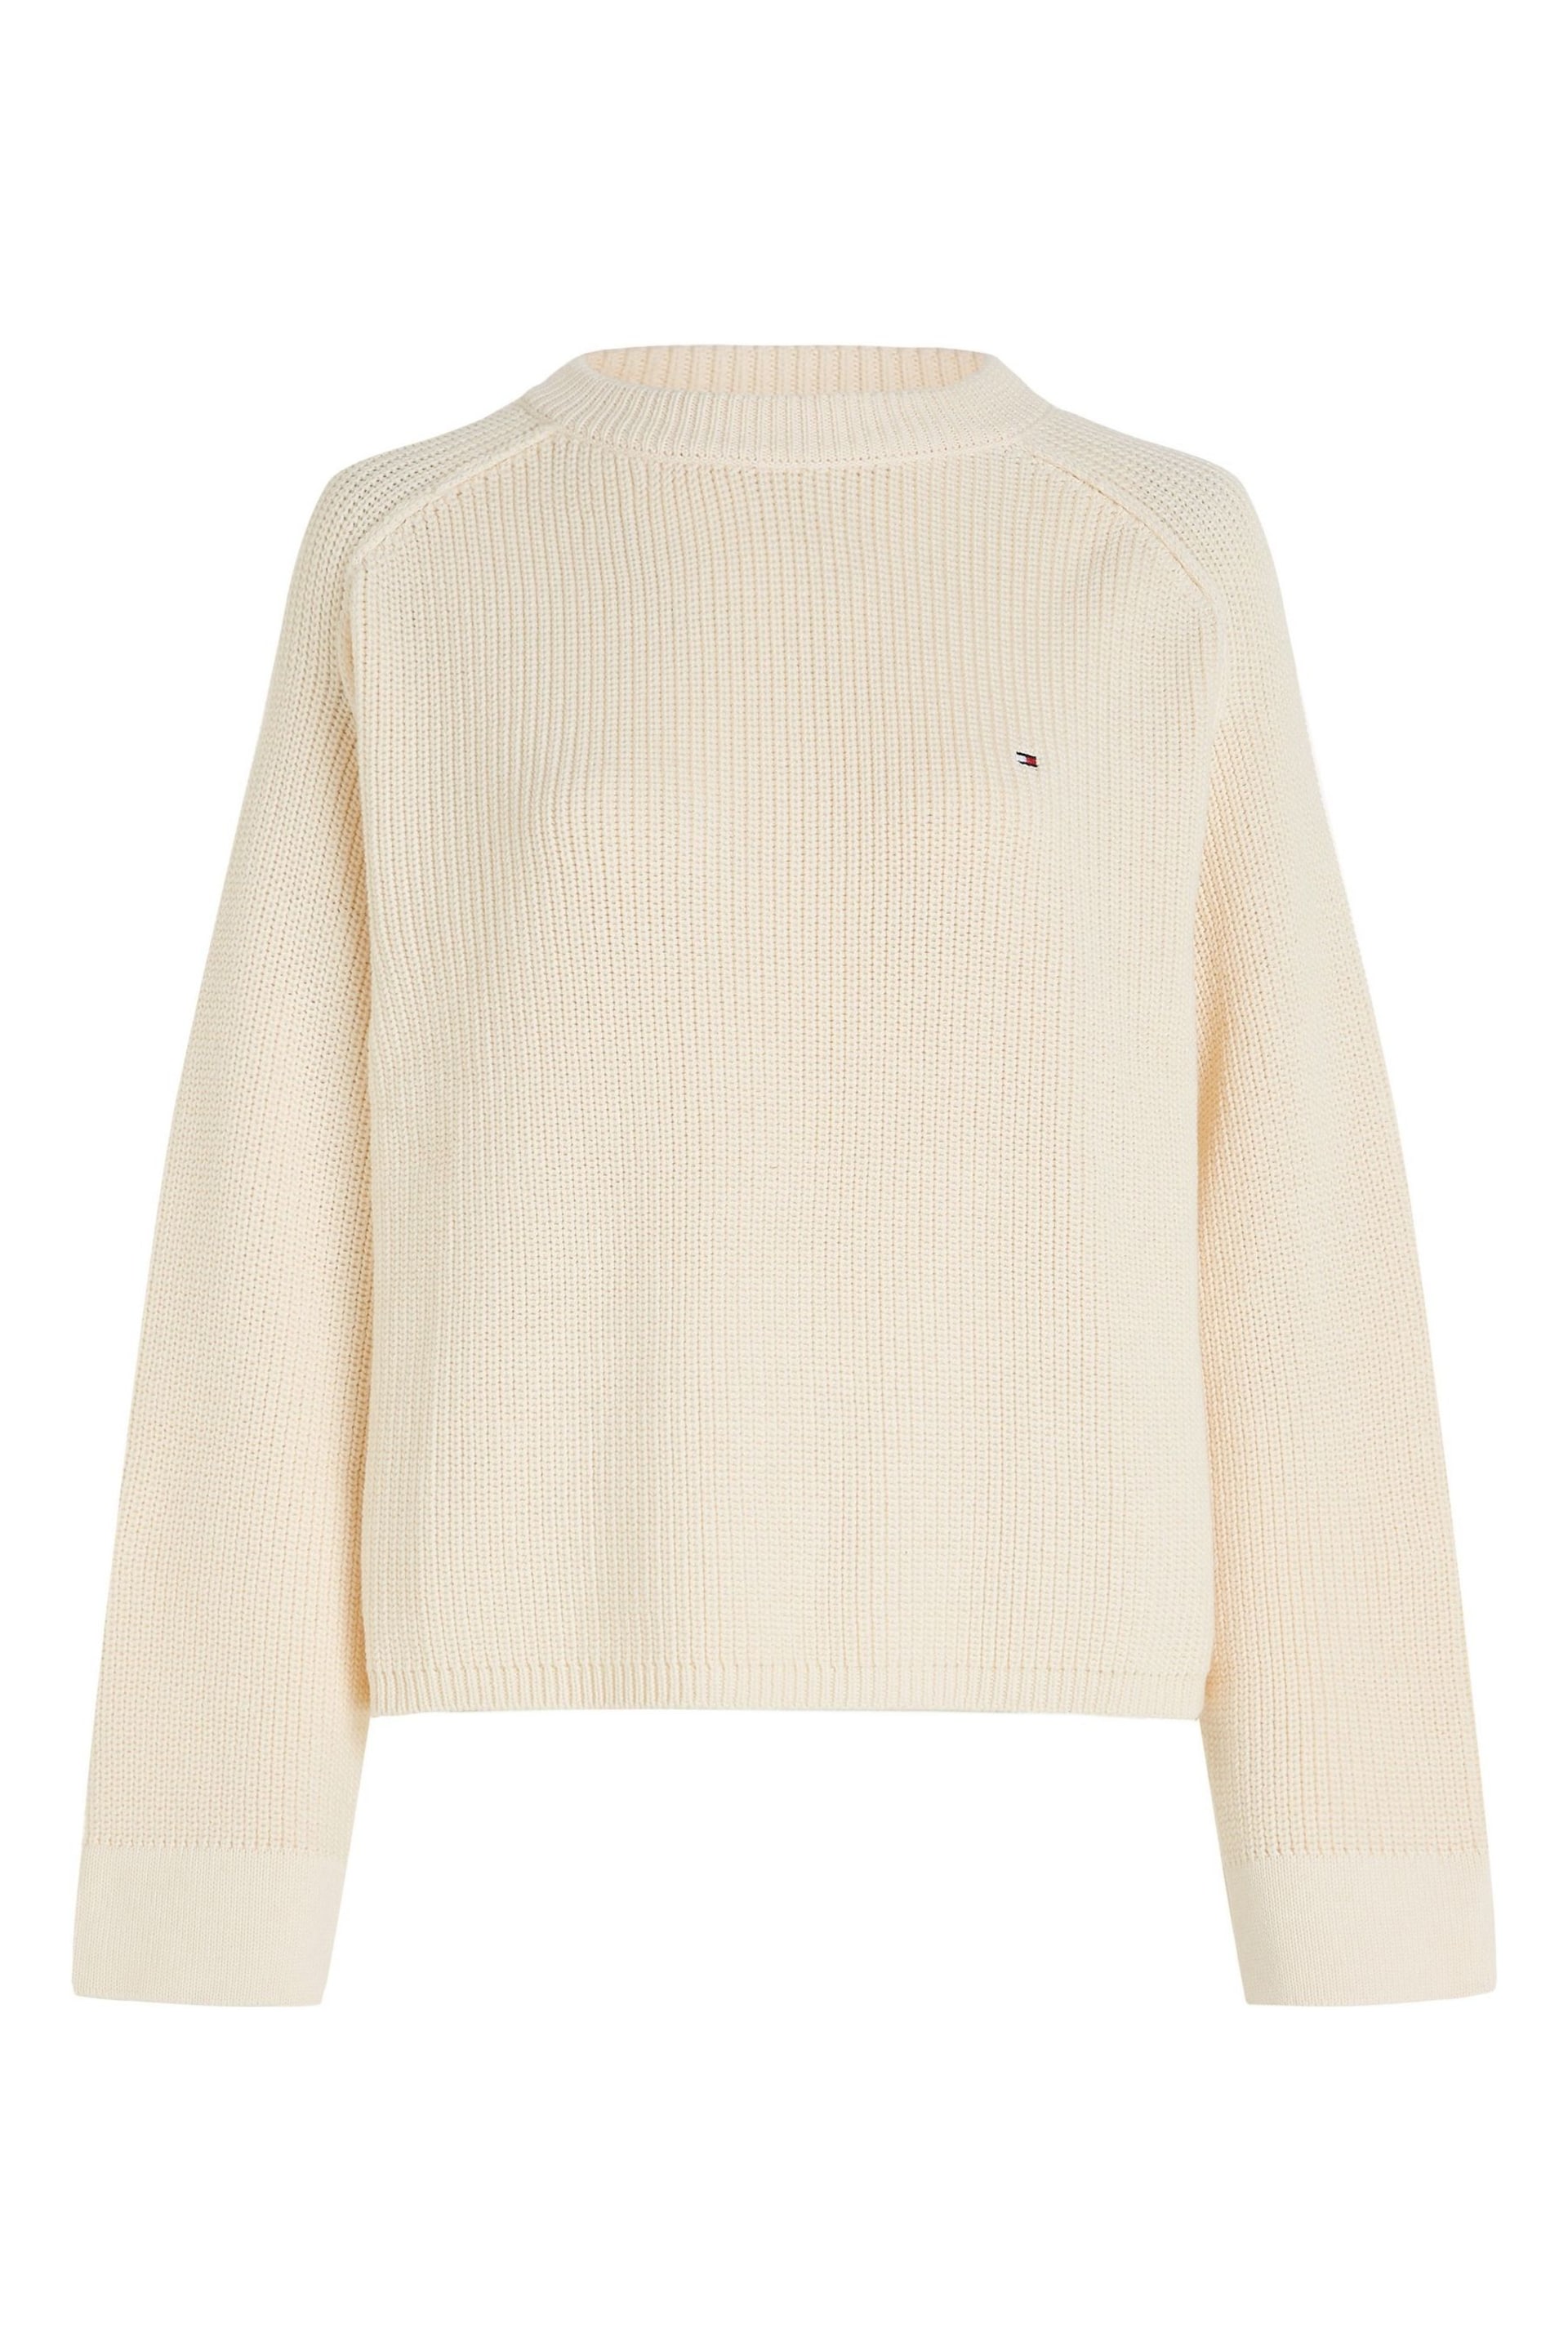 Tommy Hilfiger Cream Knit Sweater - Image 5 of 7